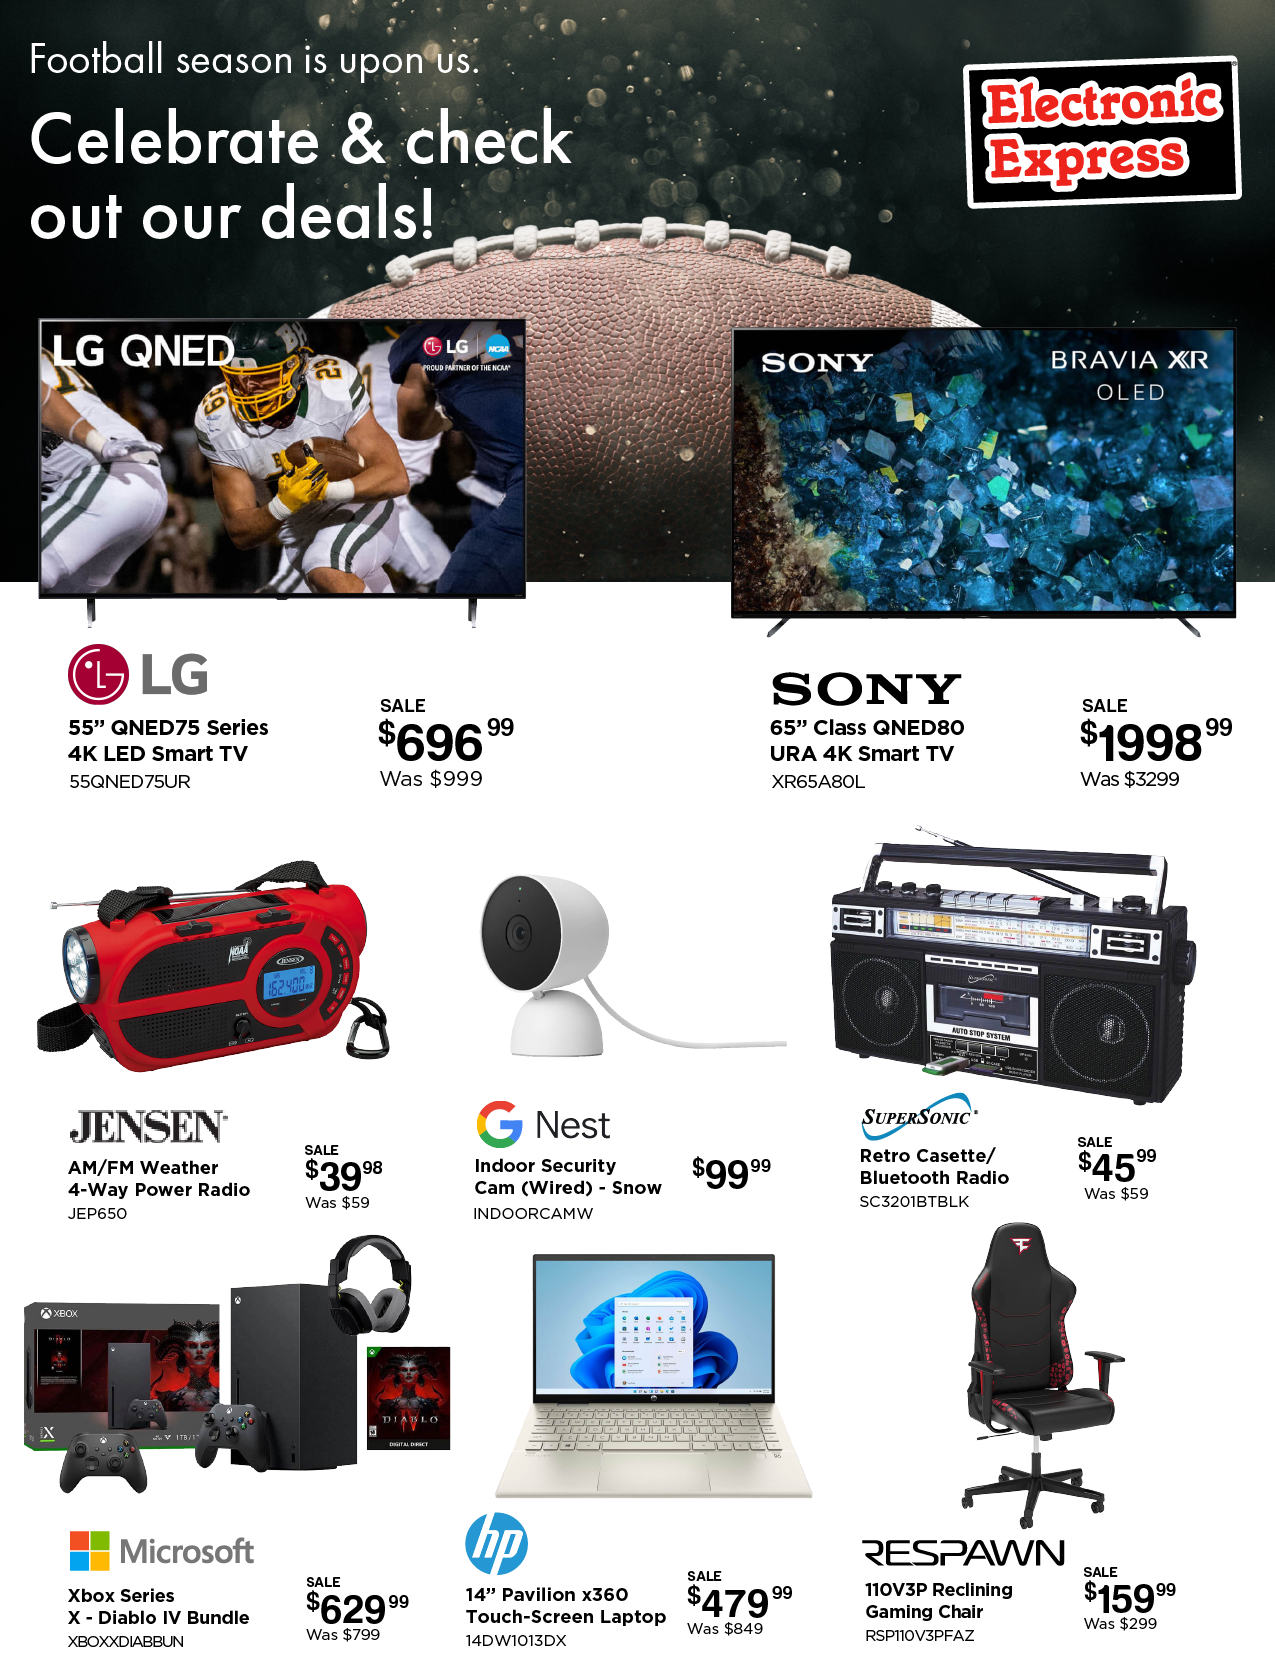 football season is upon us. Celebrate and check out our deals!